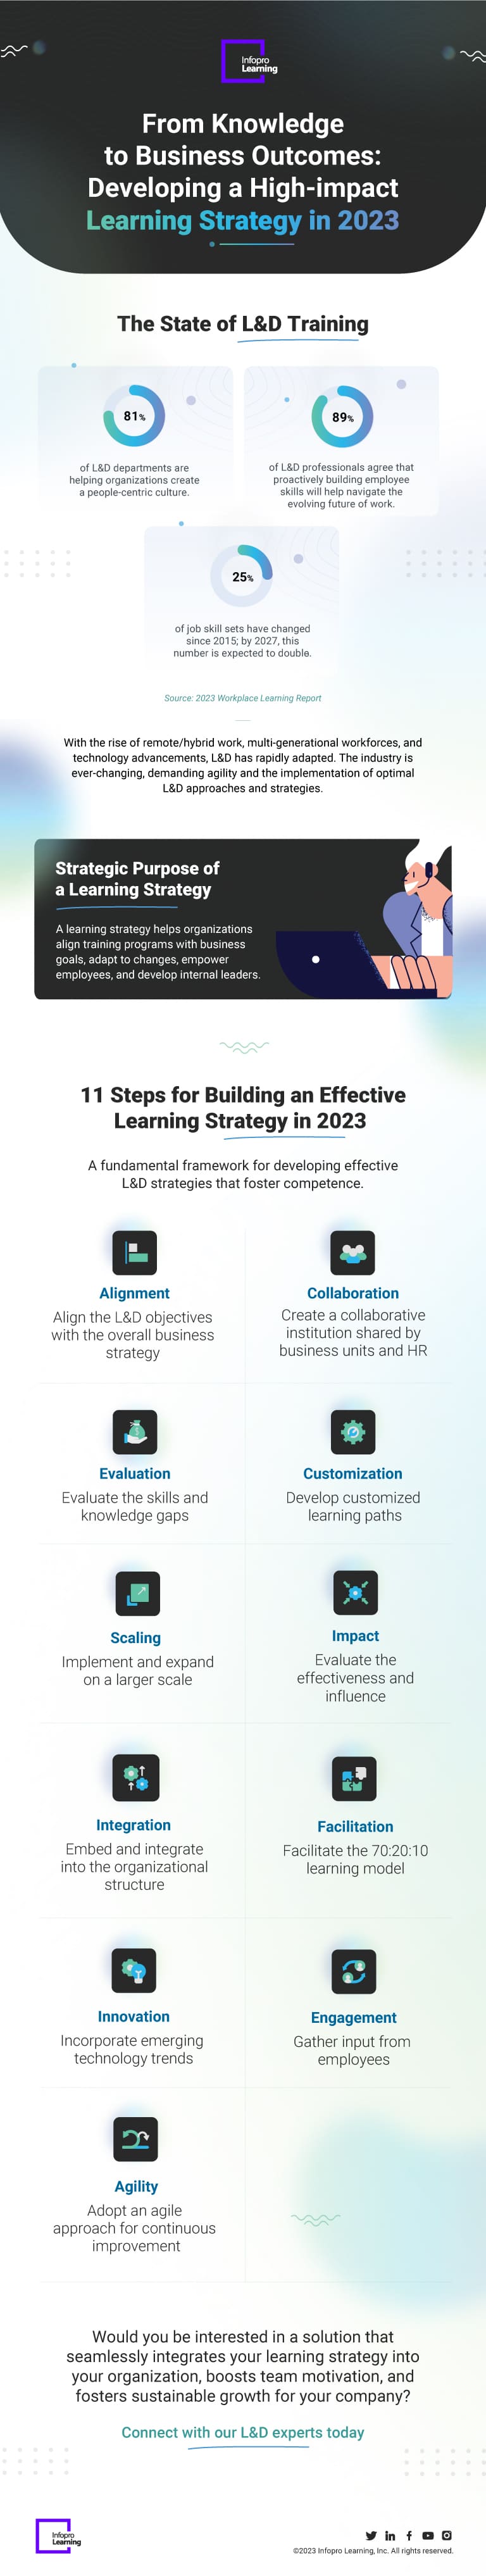 From Knowledge to Business Outcomes: Developing a High-impact Learning Strategy in 2023 